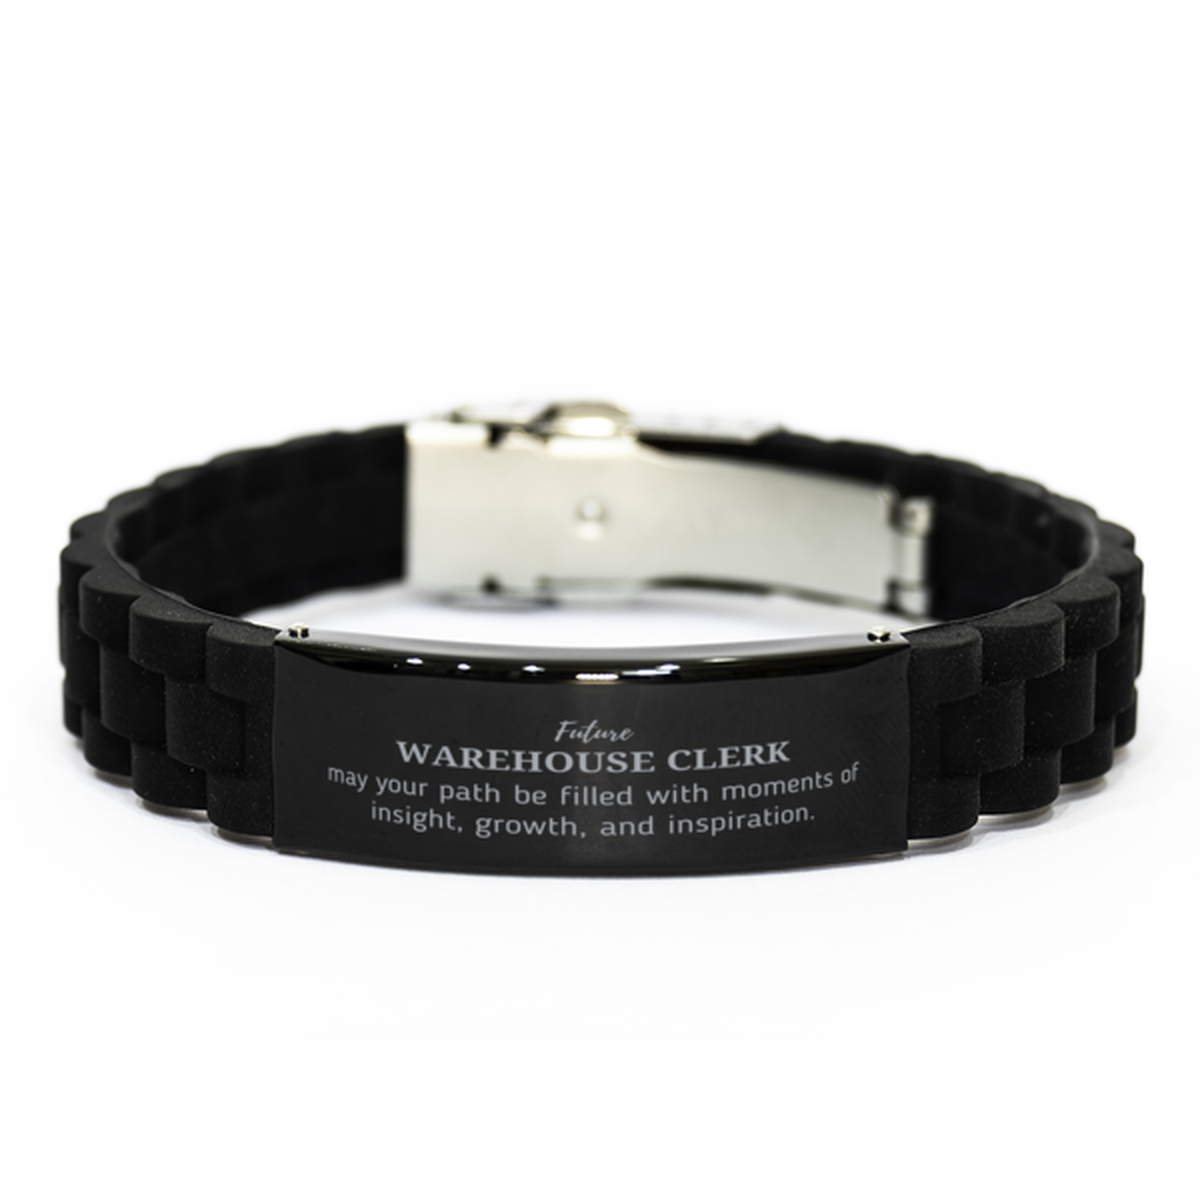 Future Warehouse Clerk Gifts, May your path be filled with moments of insight, Graduation Gifts for New Warehouse Clerk, Christmas Unique Black Glidelock Clasp Bracelet For Men, Women, Friends